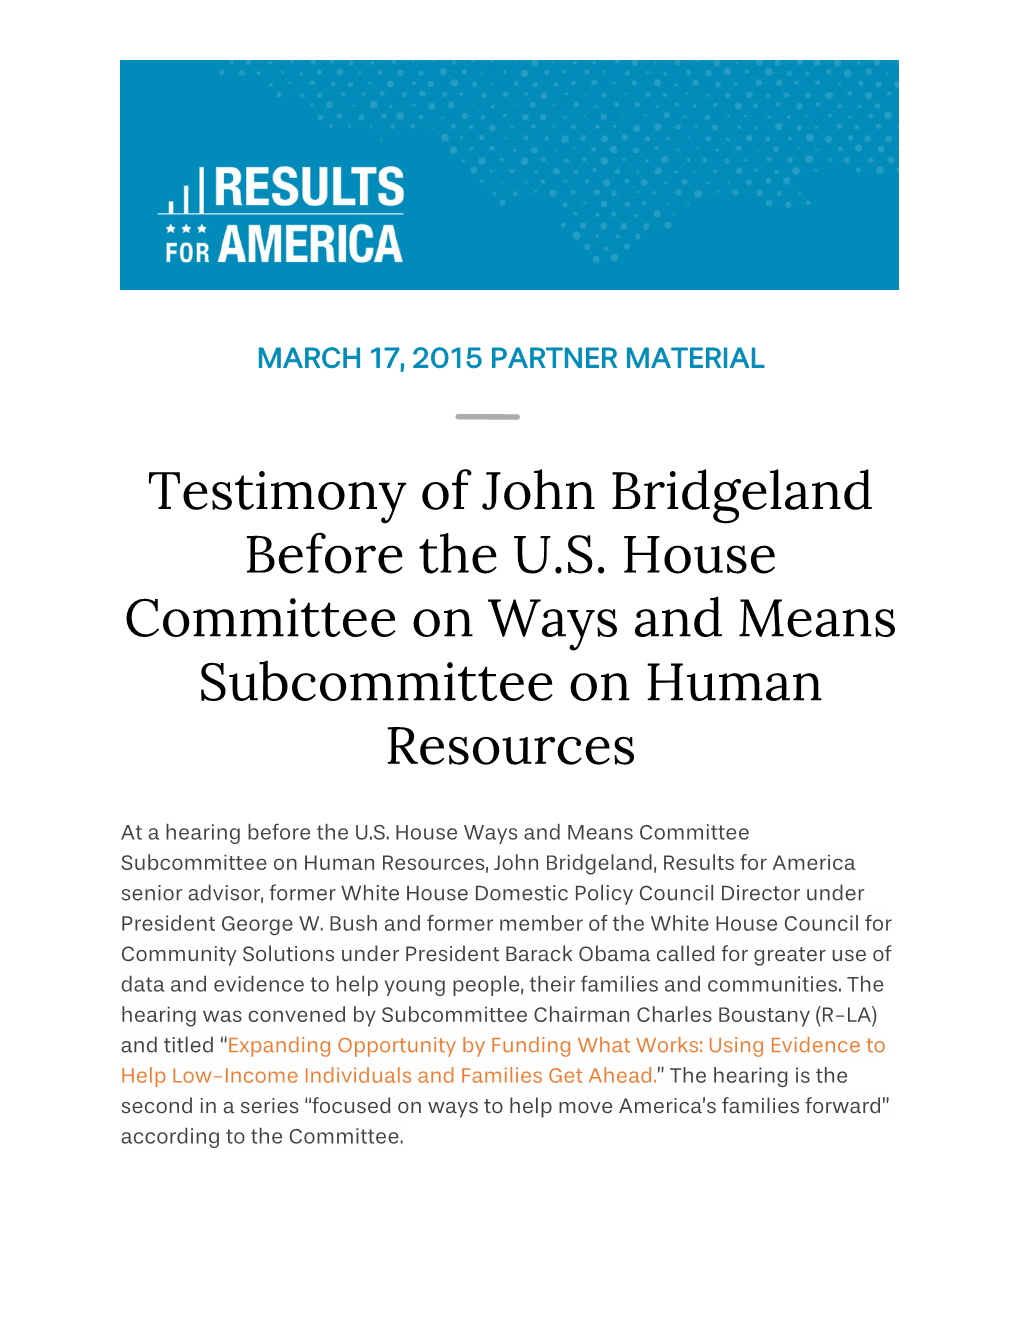 Testimony of John Bridgeland Before the U.S. House Committee on Ways and Means Subcommittee on Human Resources